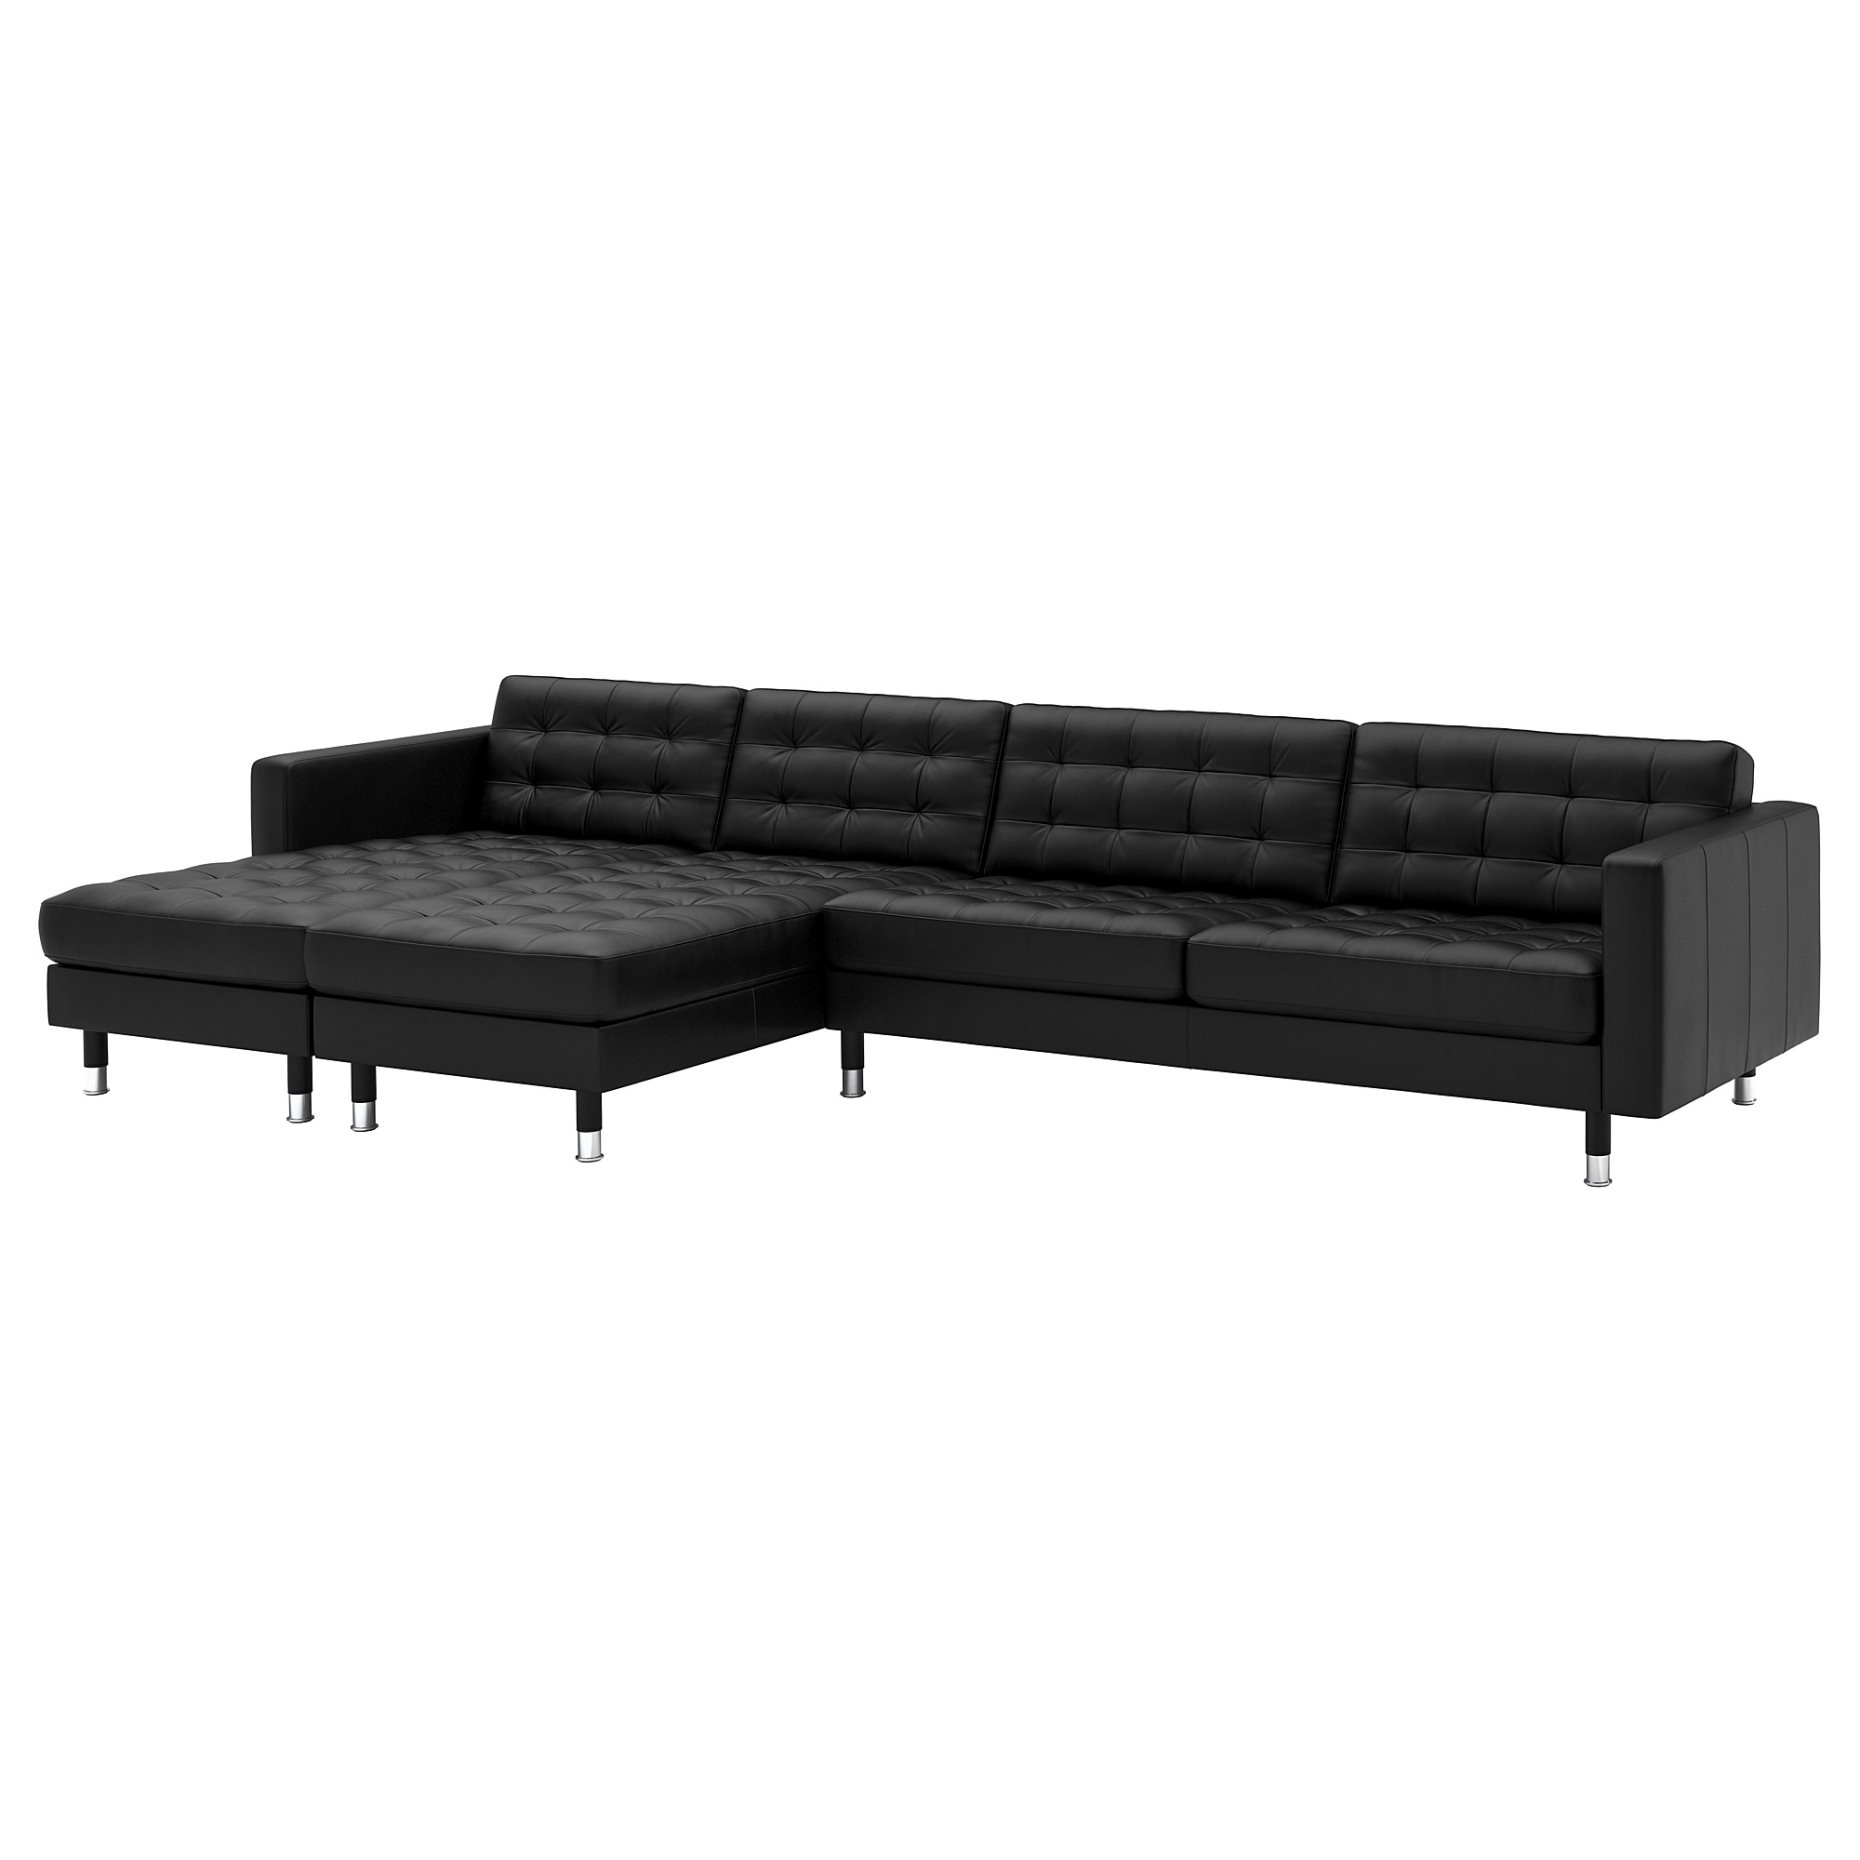 LANDSKRONA, 5-seat sofa with chaise longues, 190.462.01